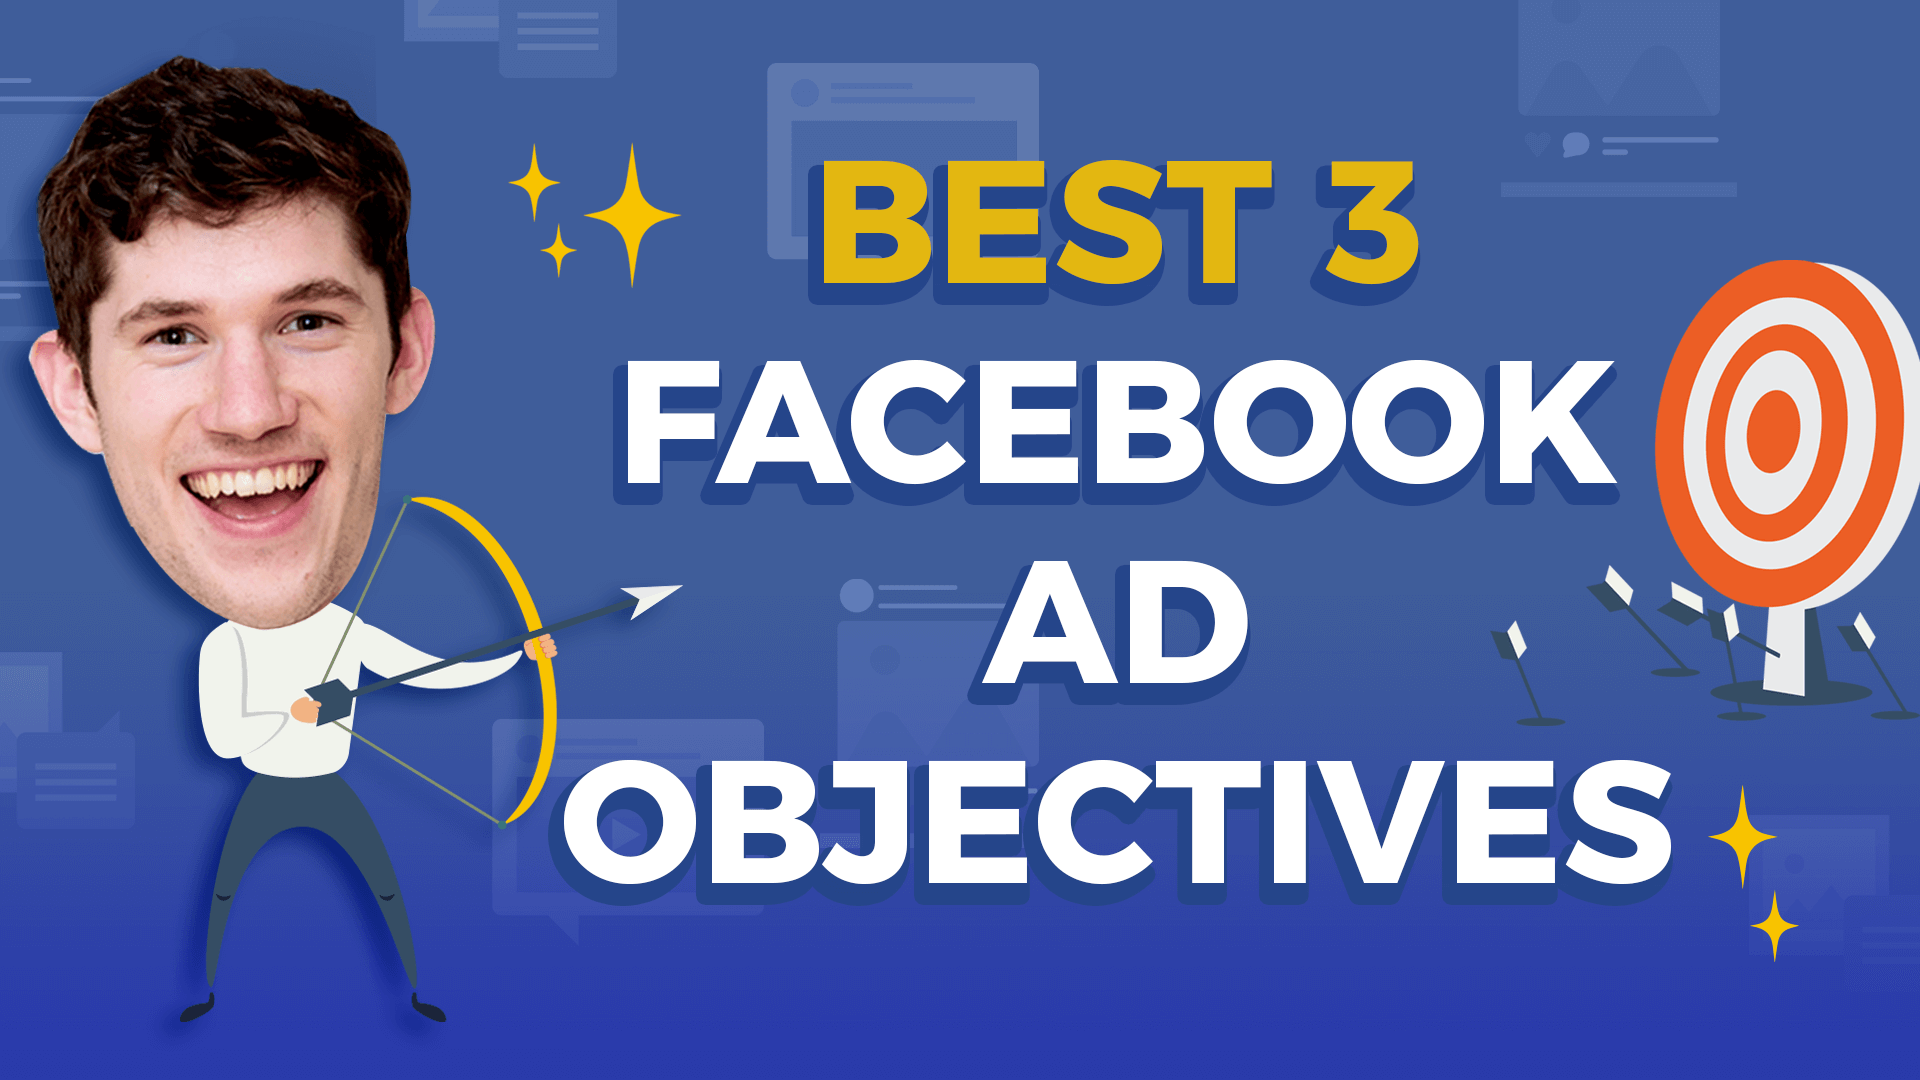 Facebook Ad Objectives: Which One Should You Use And Why?